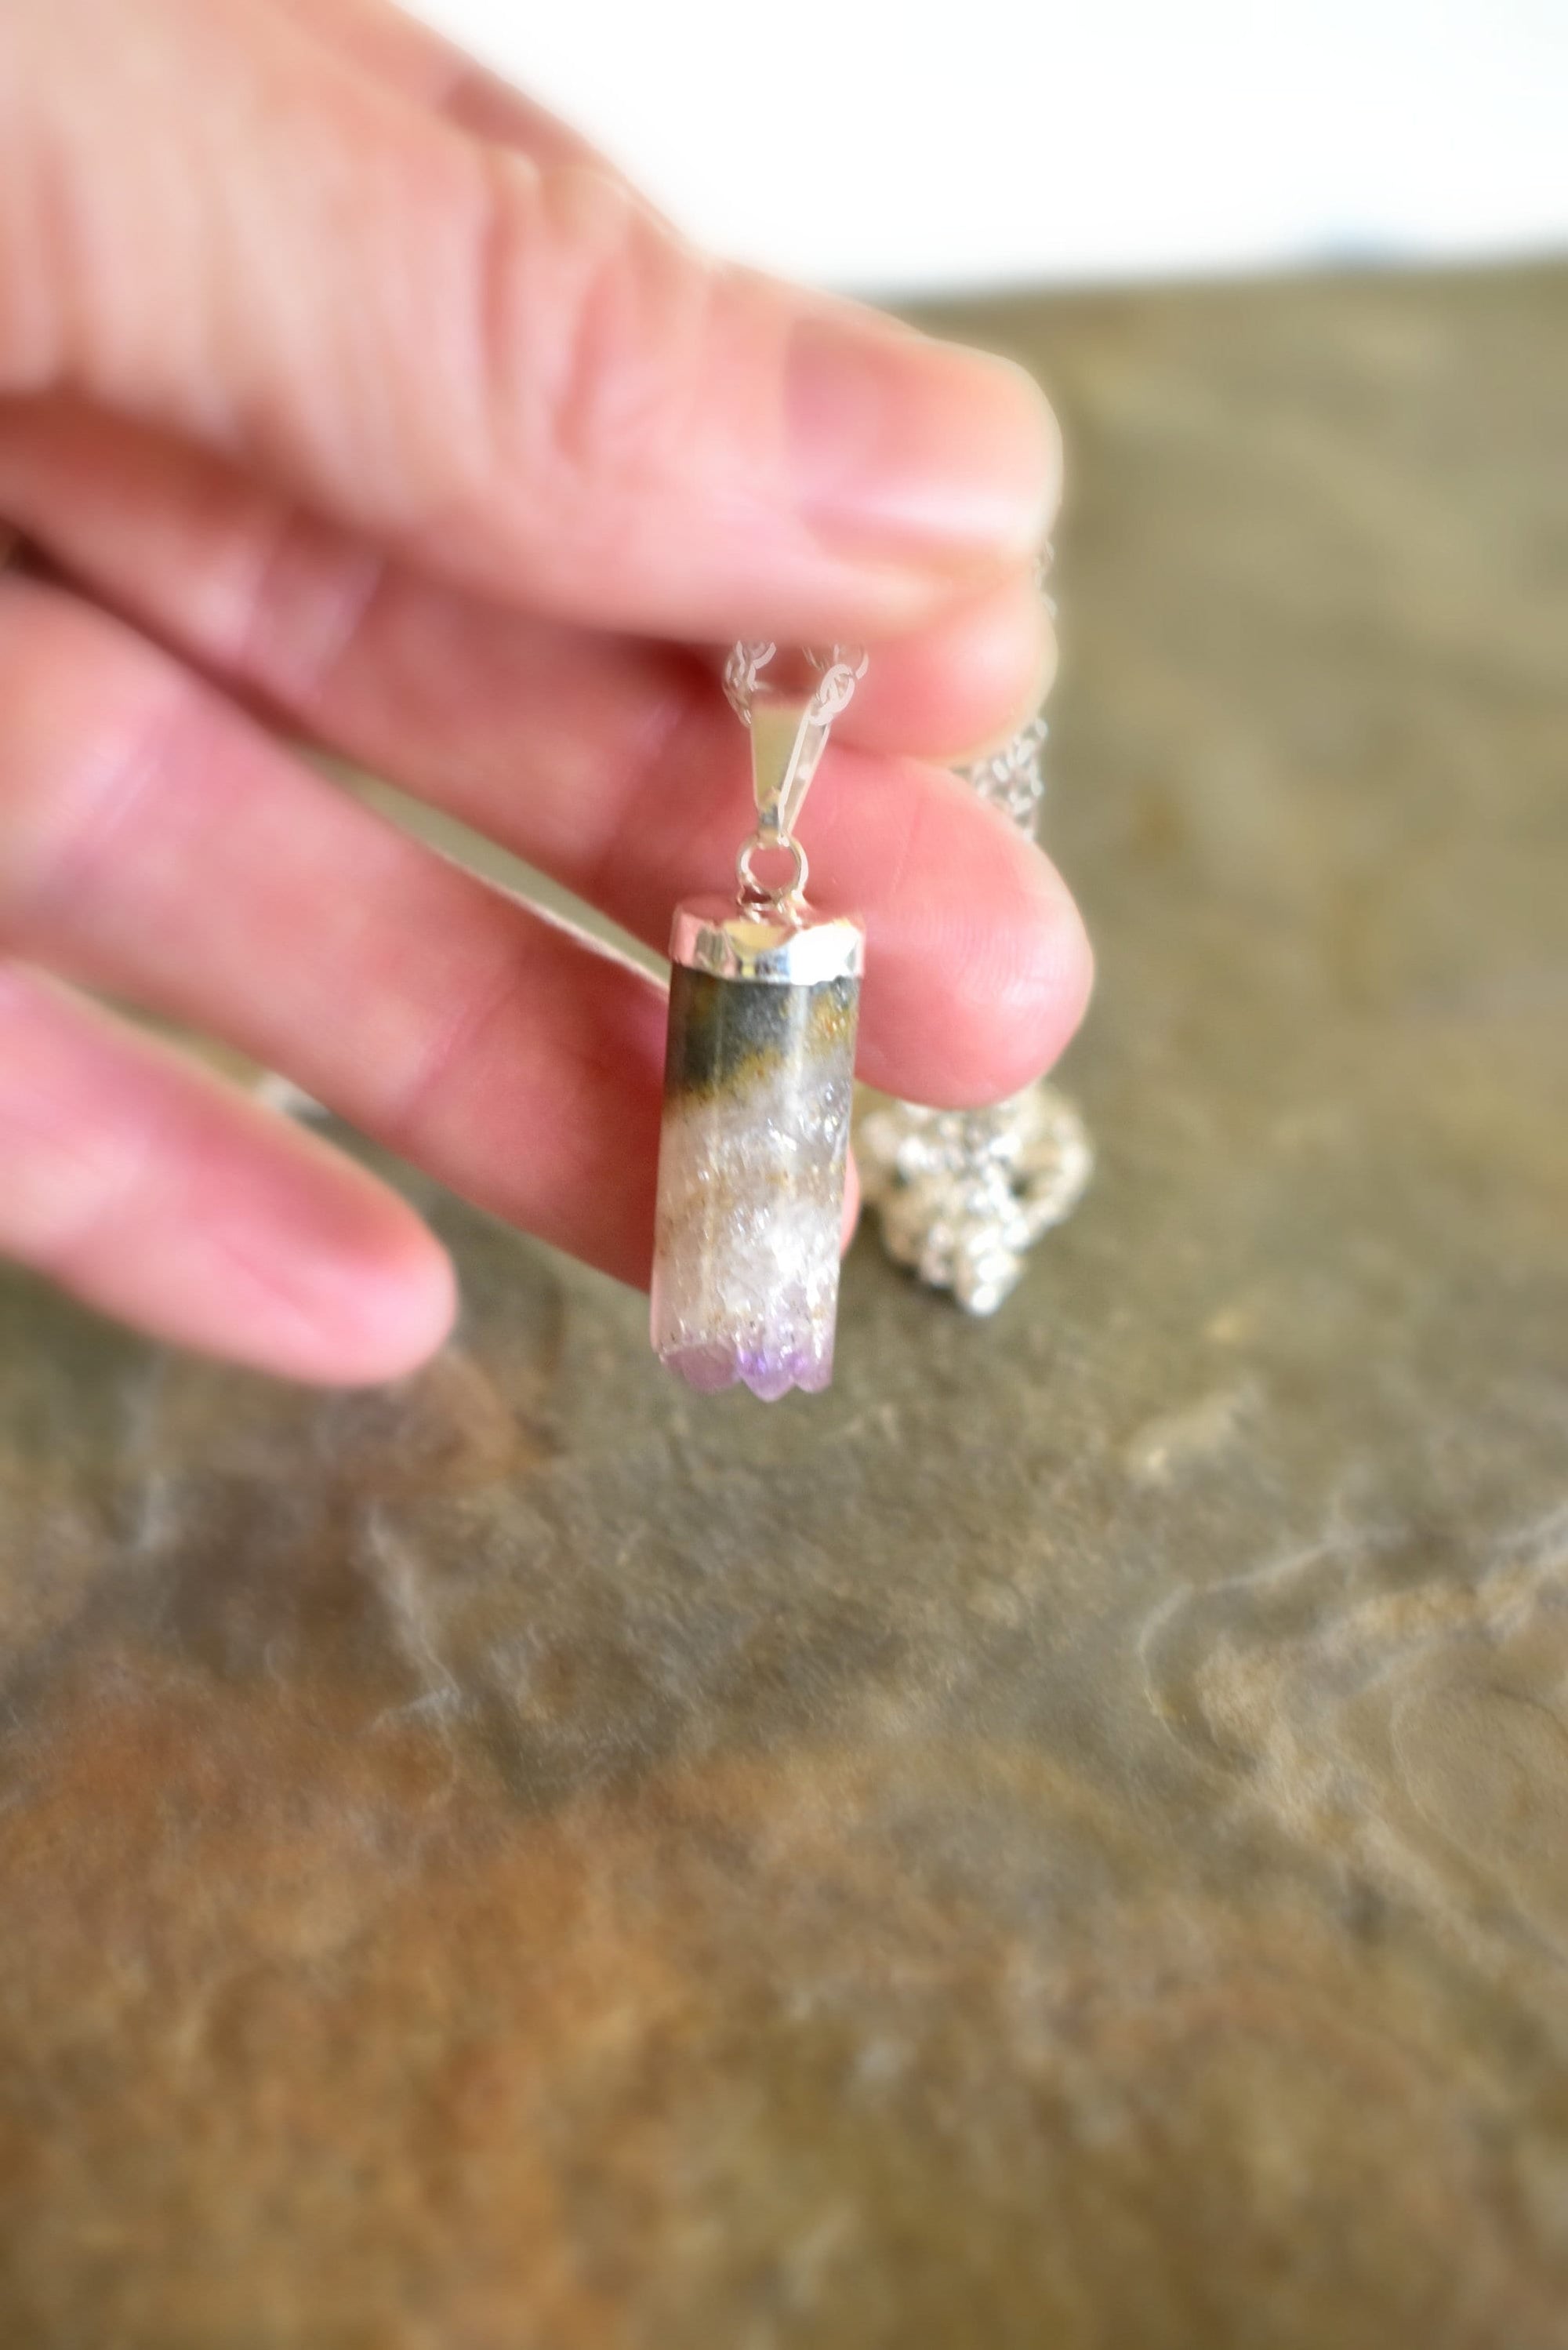 Amethyst Quartz Crystal Pendant, Raw Crystal Pillar Necklace, Gift for Geologist, Quartz Silver Double Chain Necklace, Uncommon Rare Jewelry